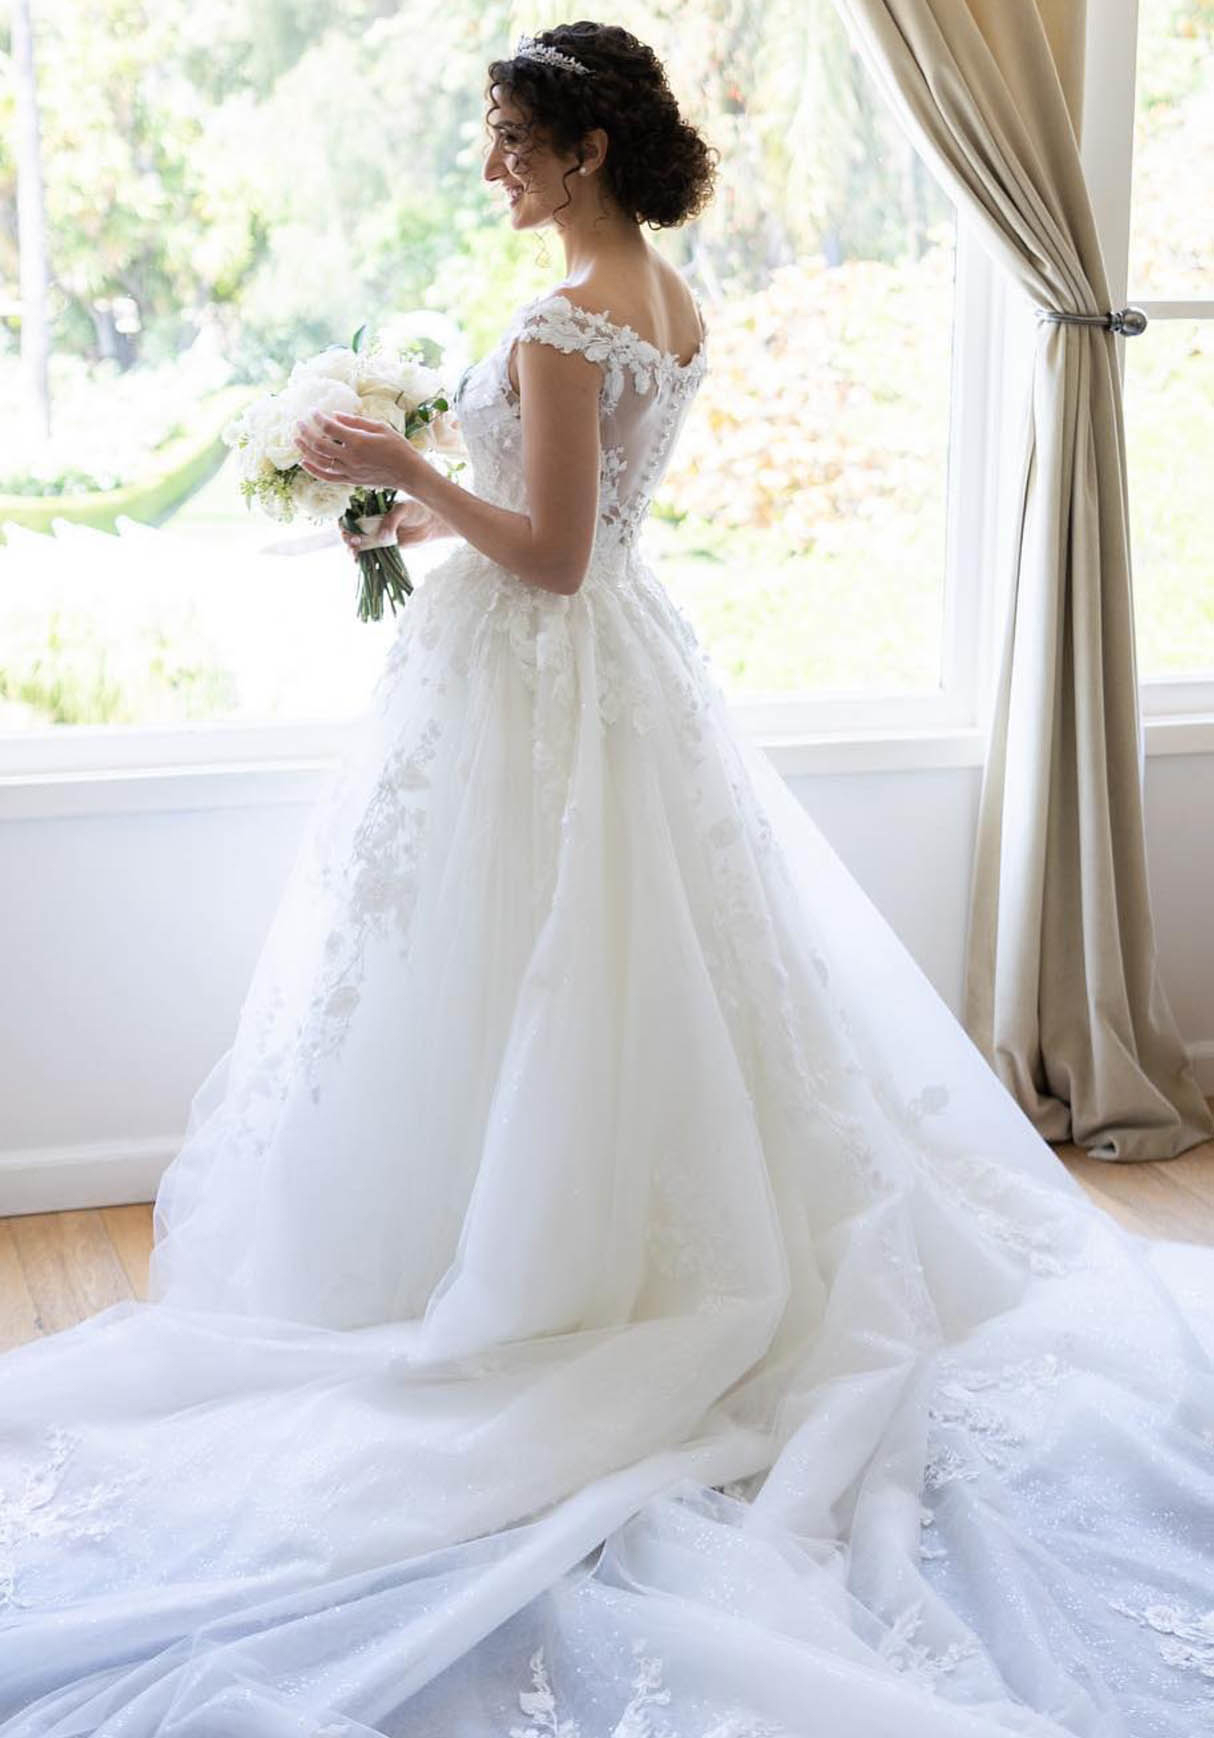 Photo of the real bride weA custom gown